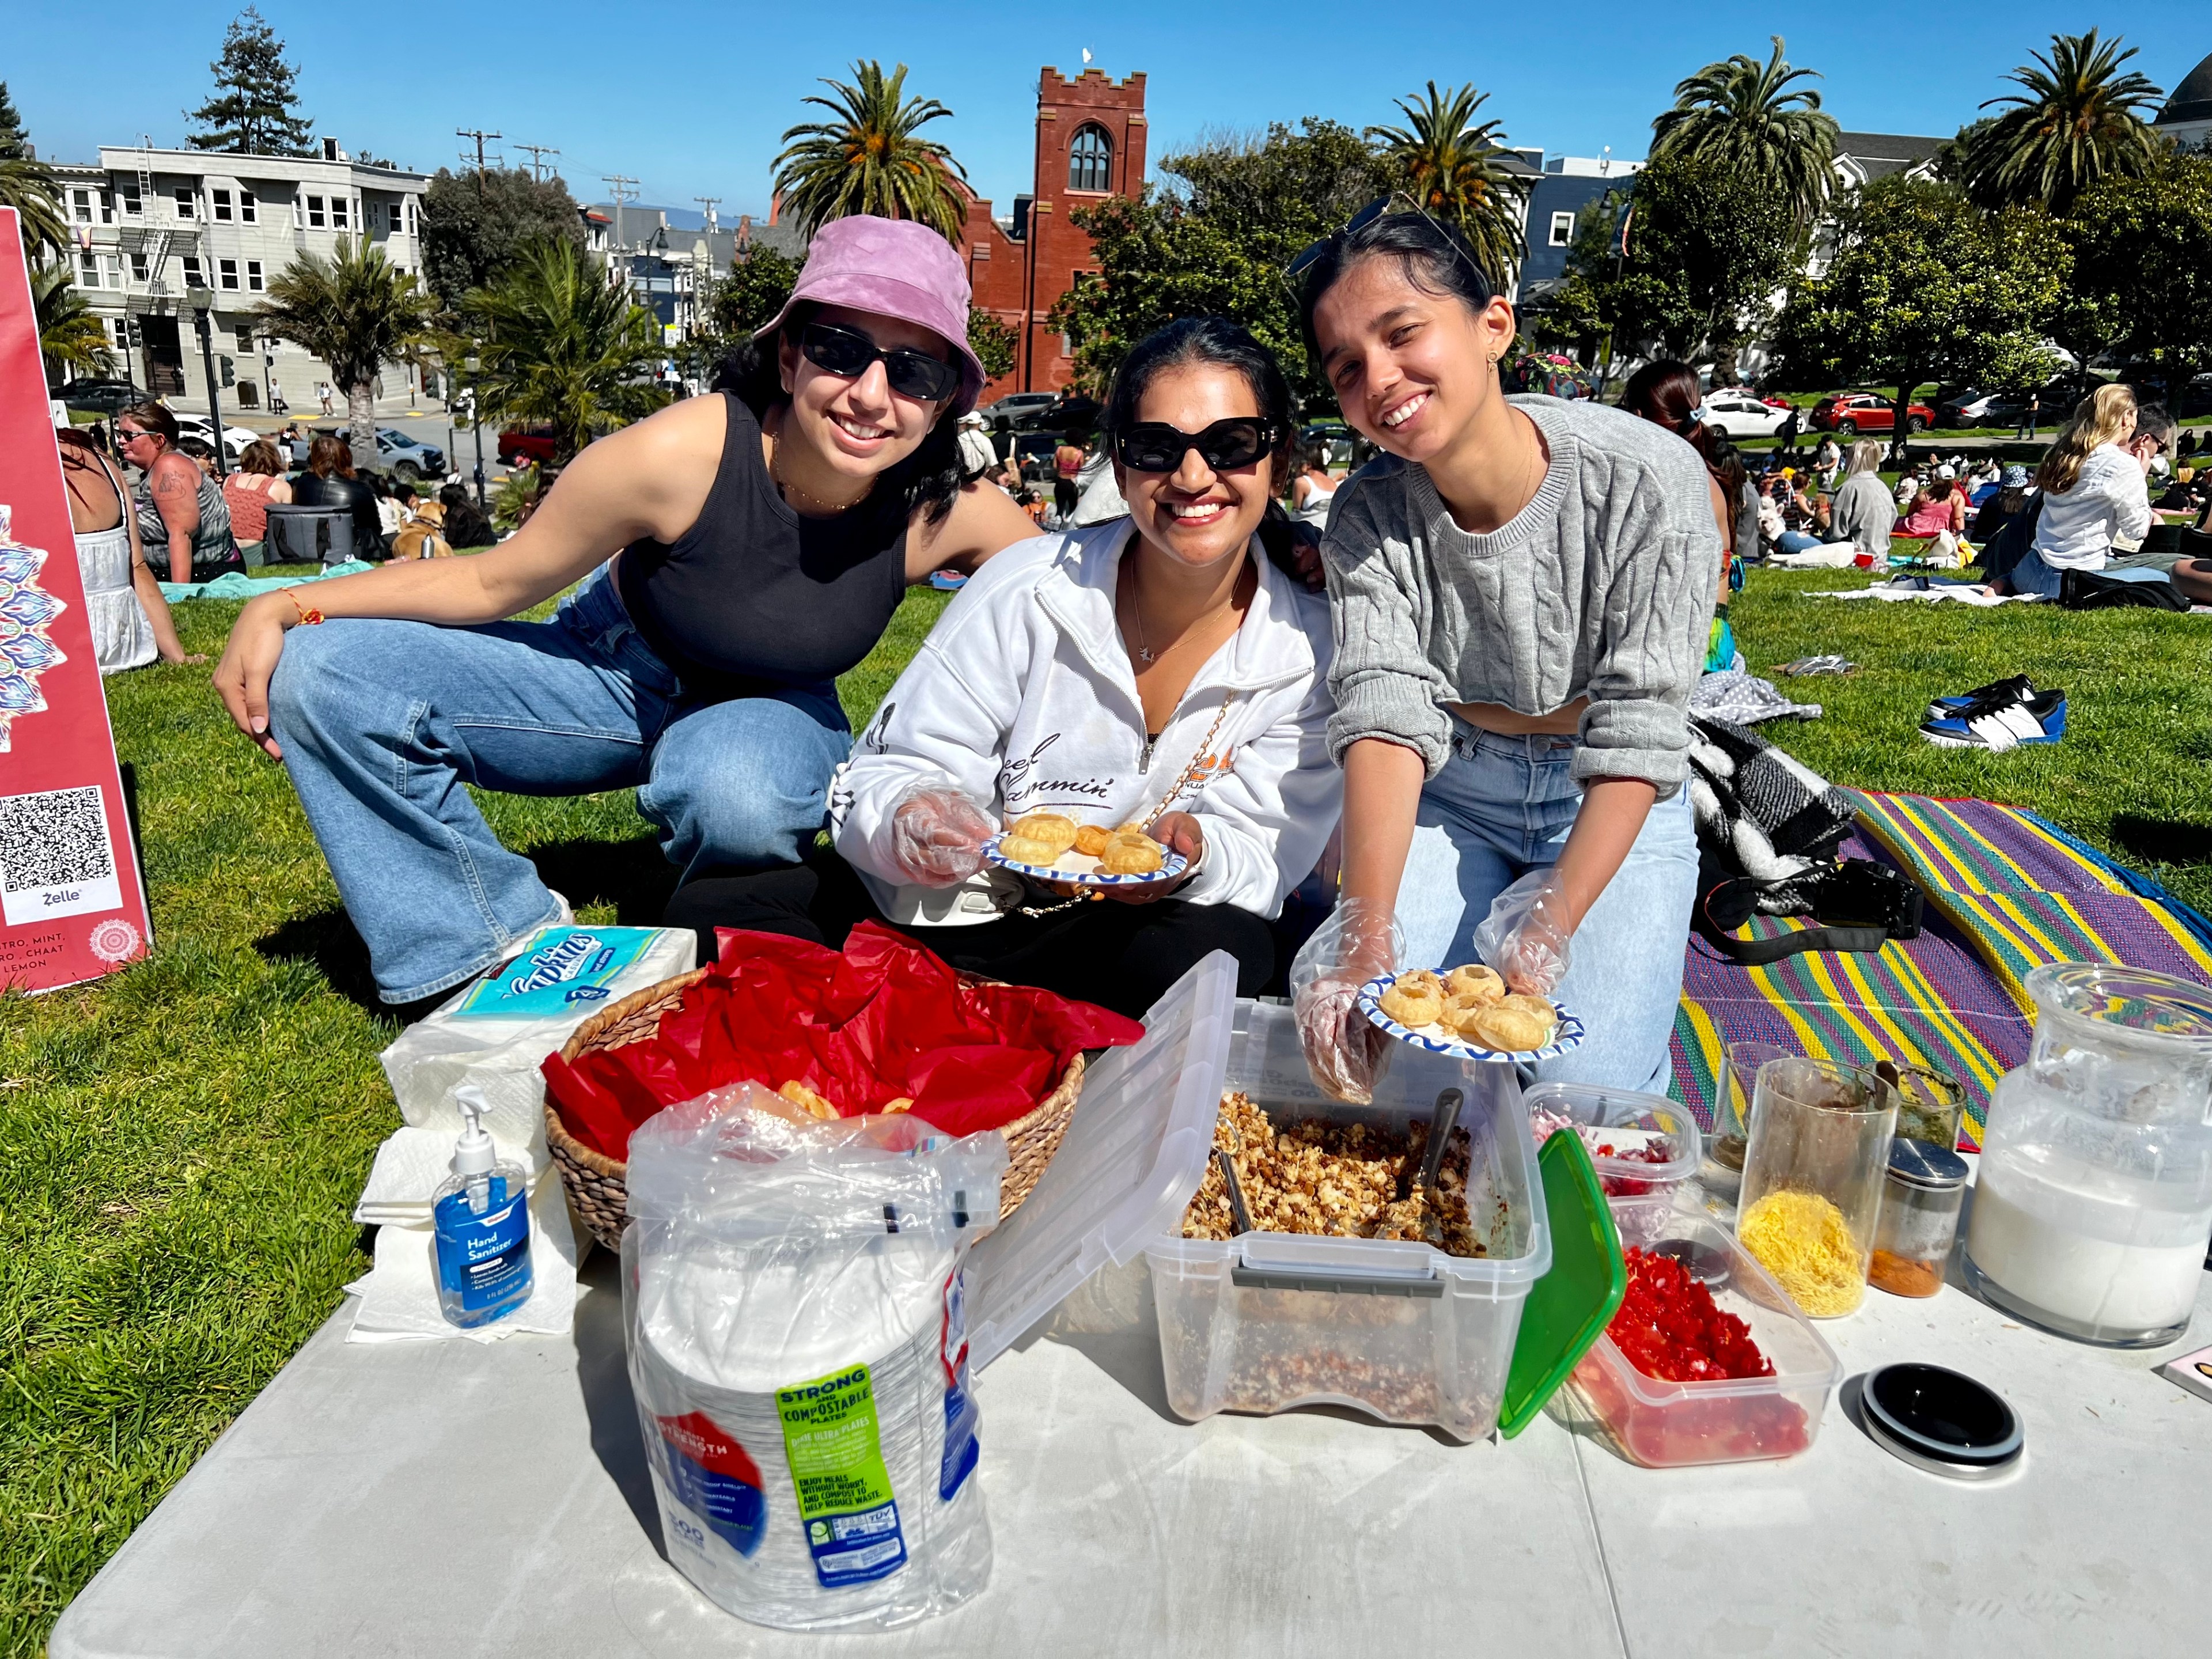 Three people sitting on a blanket with food at a sunny park, smiling at the camera.